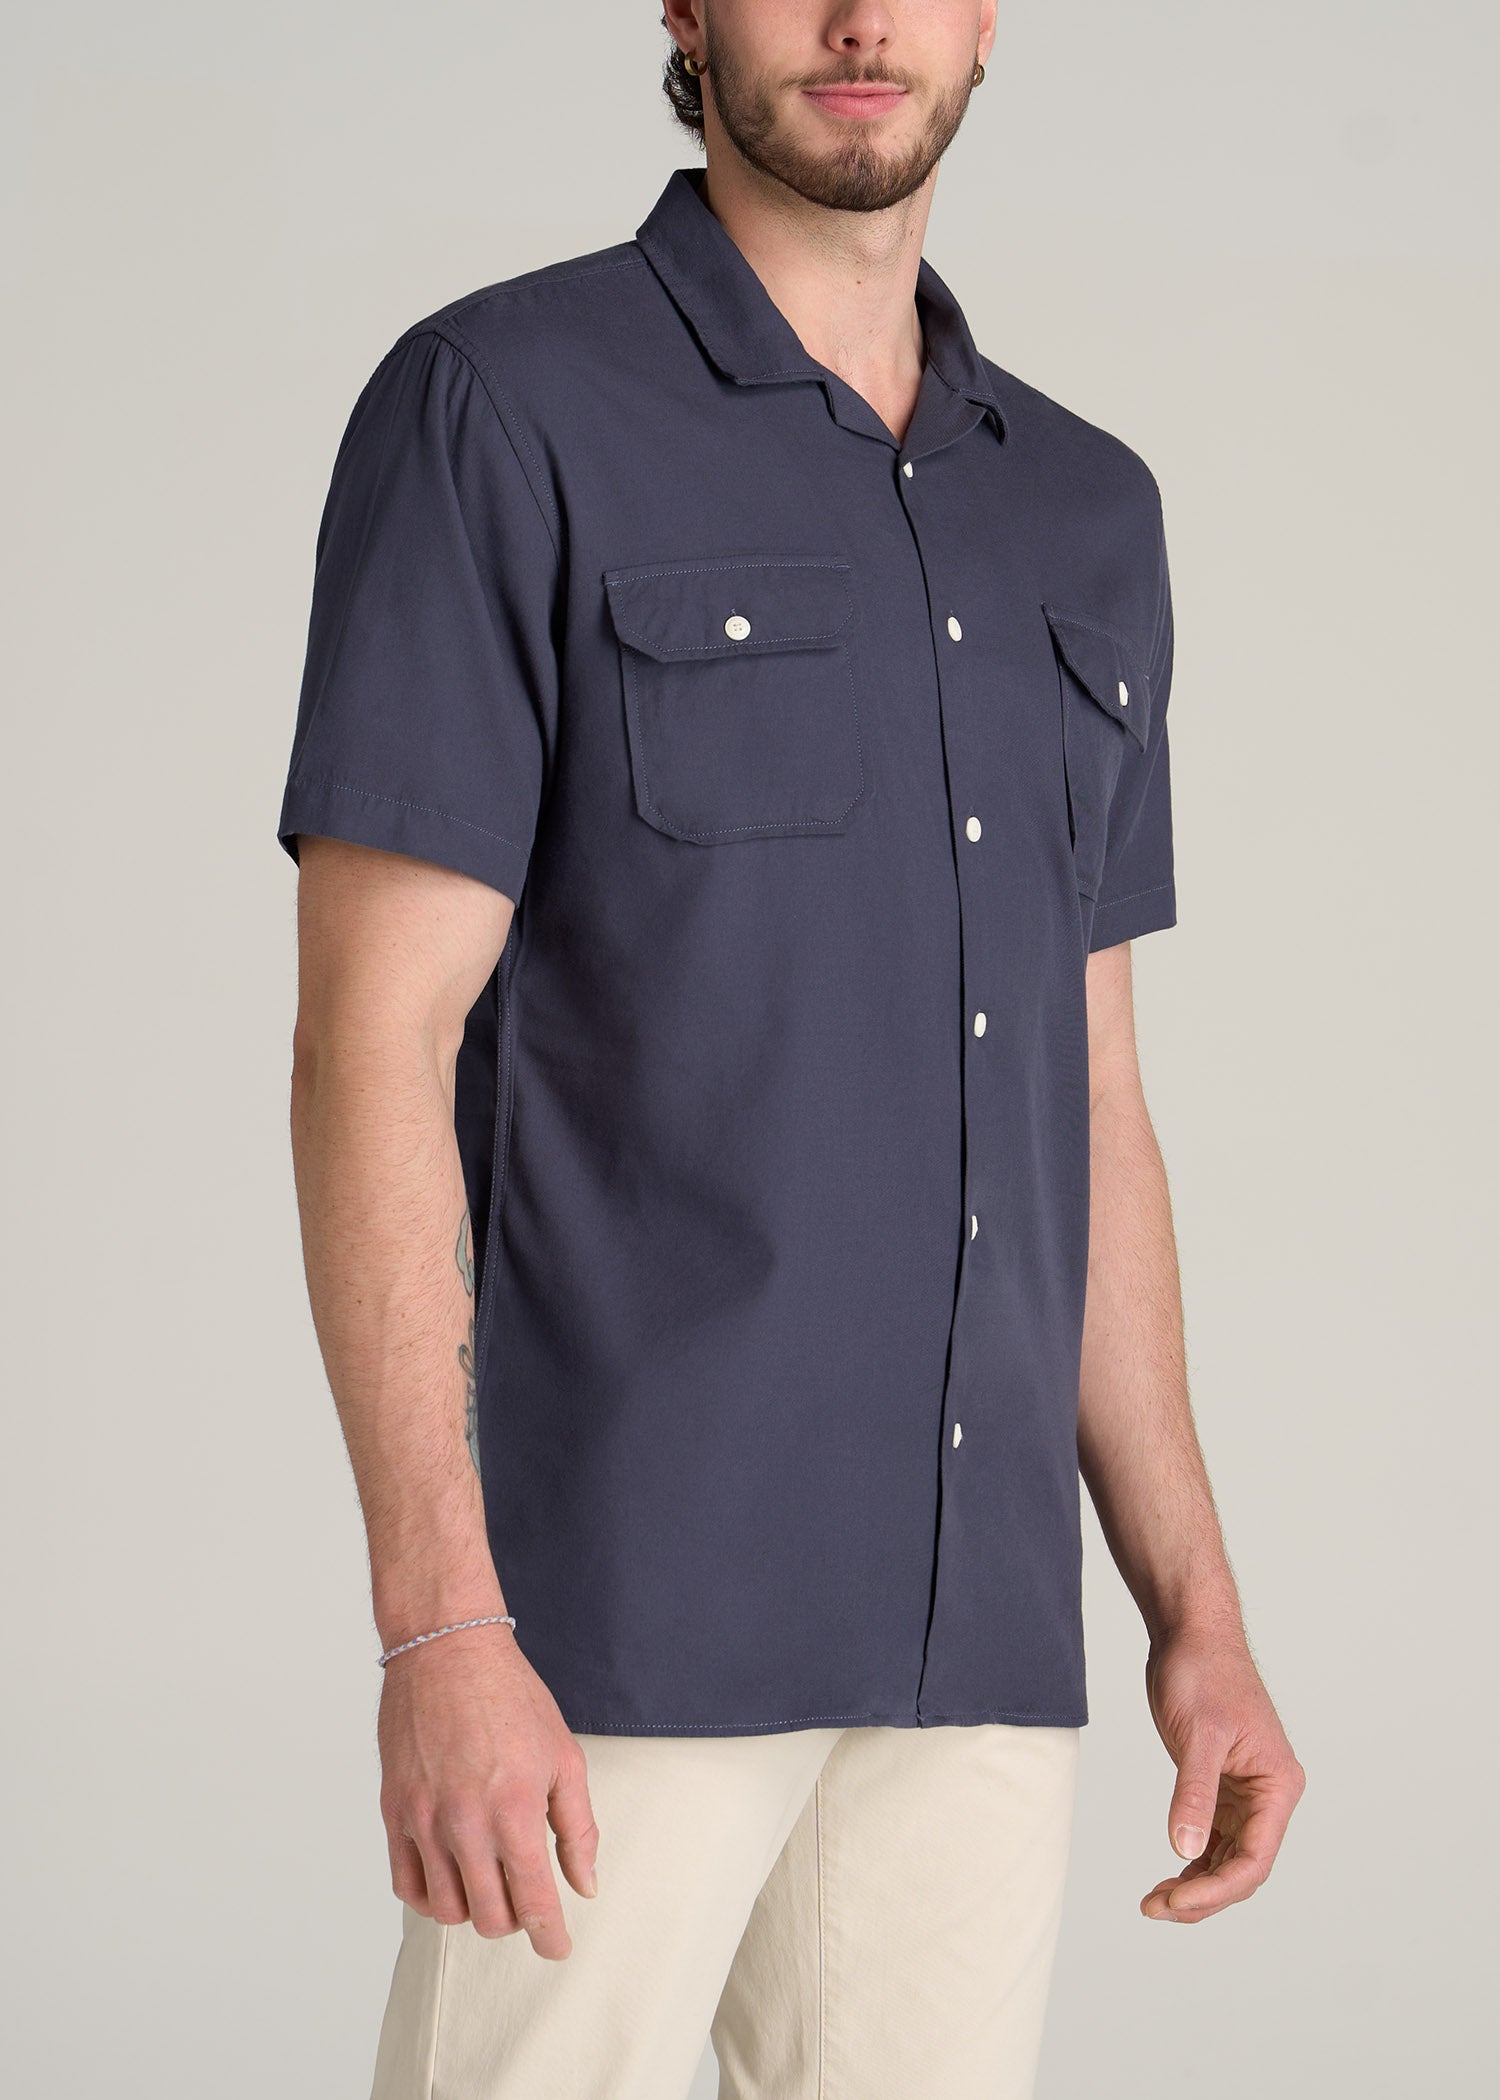 LJ&S Men's Tall Two-Pocket Camp Shirt Weathered Navy | American Tall